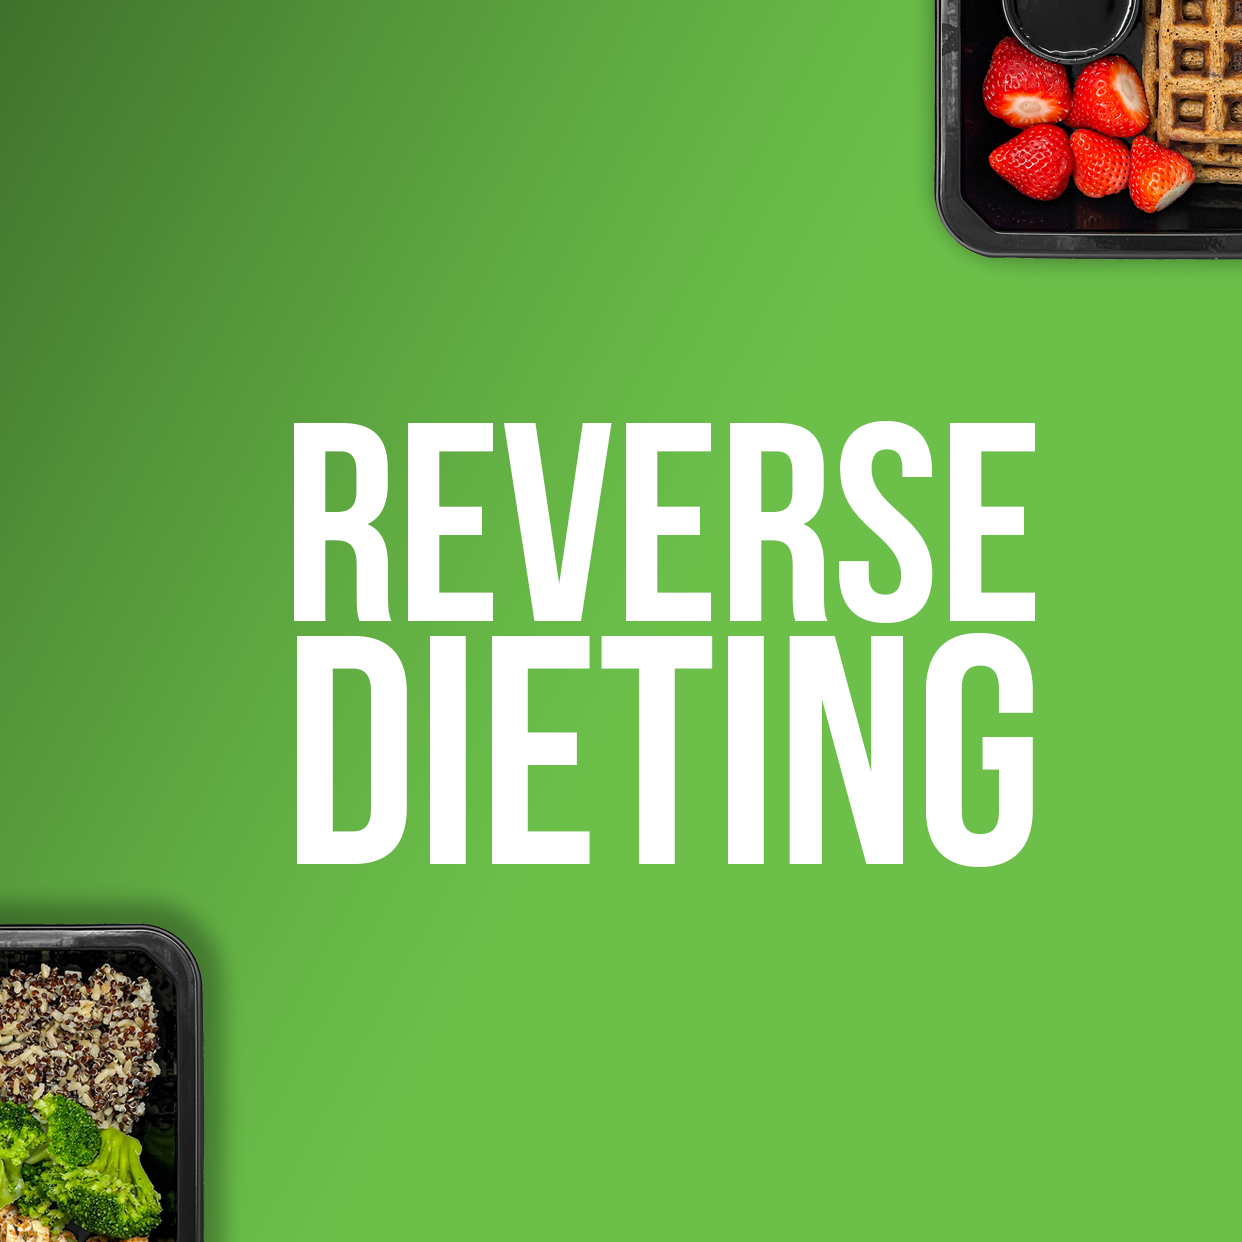 Should you be doing a REVERSE diet?